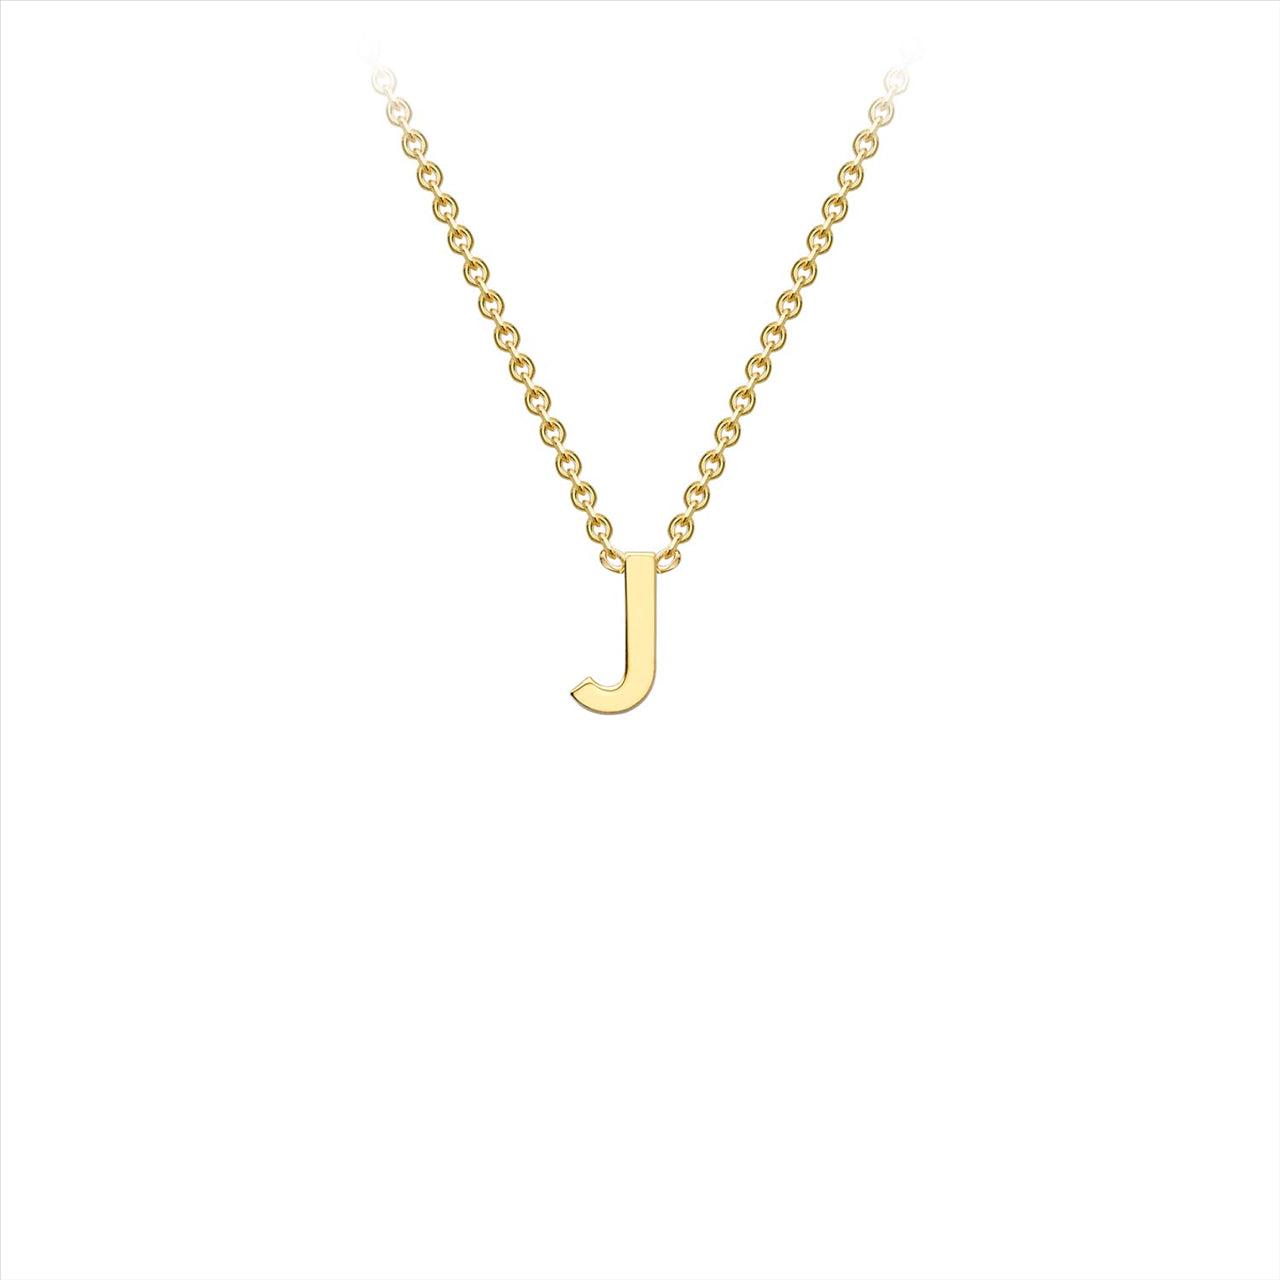 9K Yellow Gold 'J' Initial Adjustable Necklace 38cm-43cm